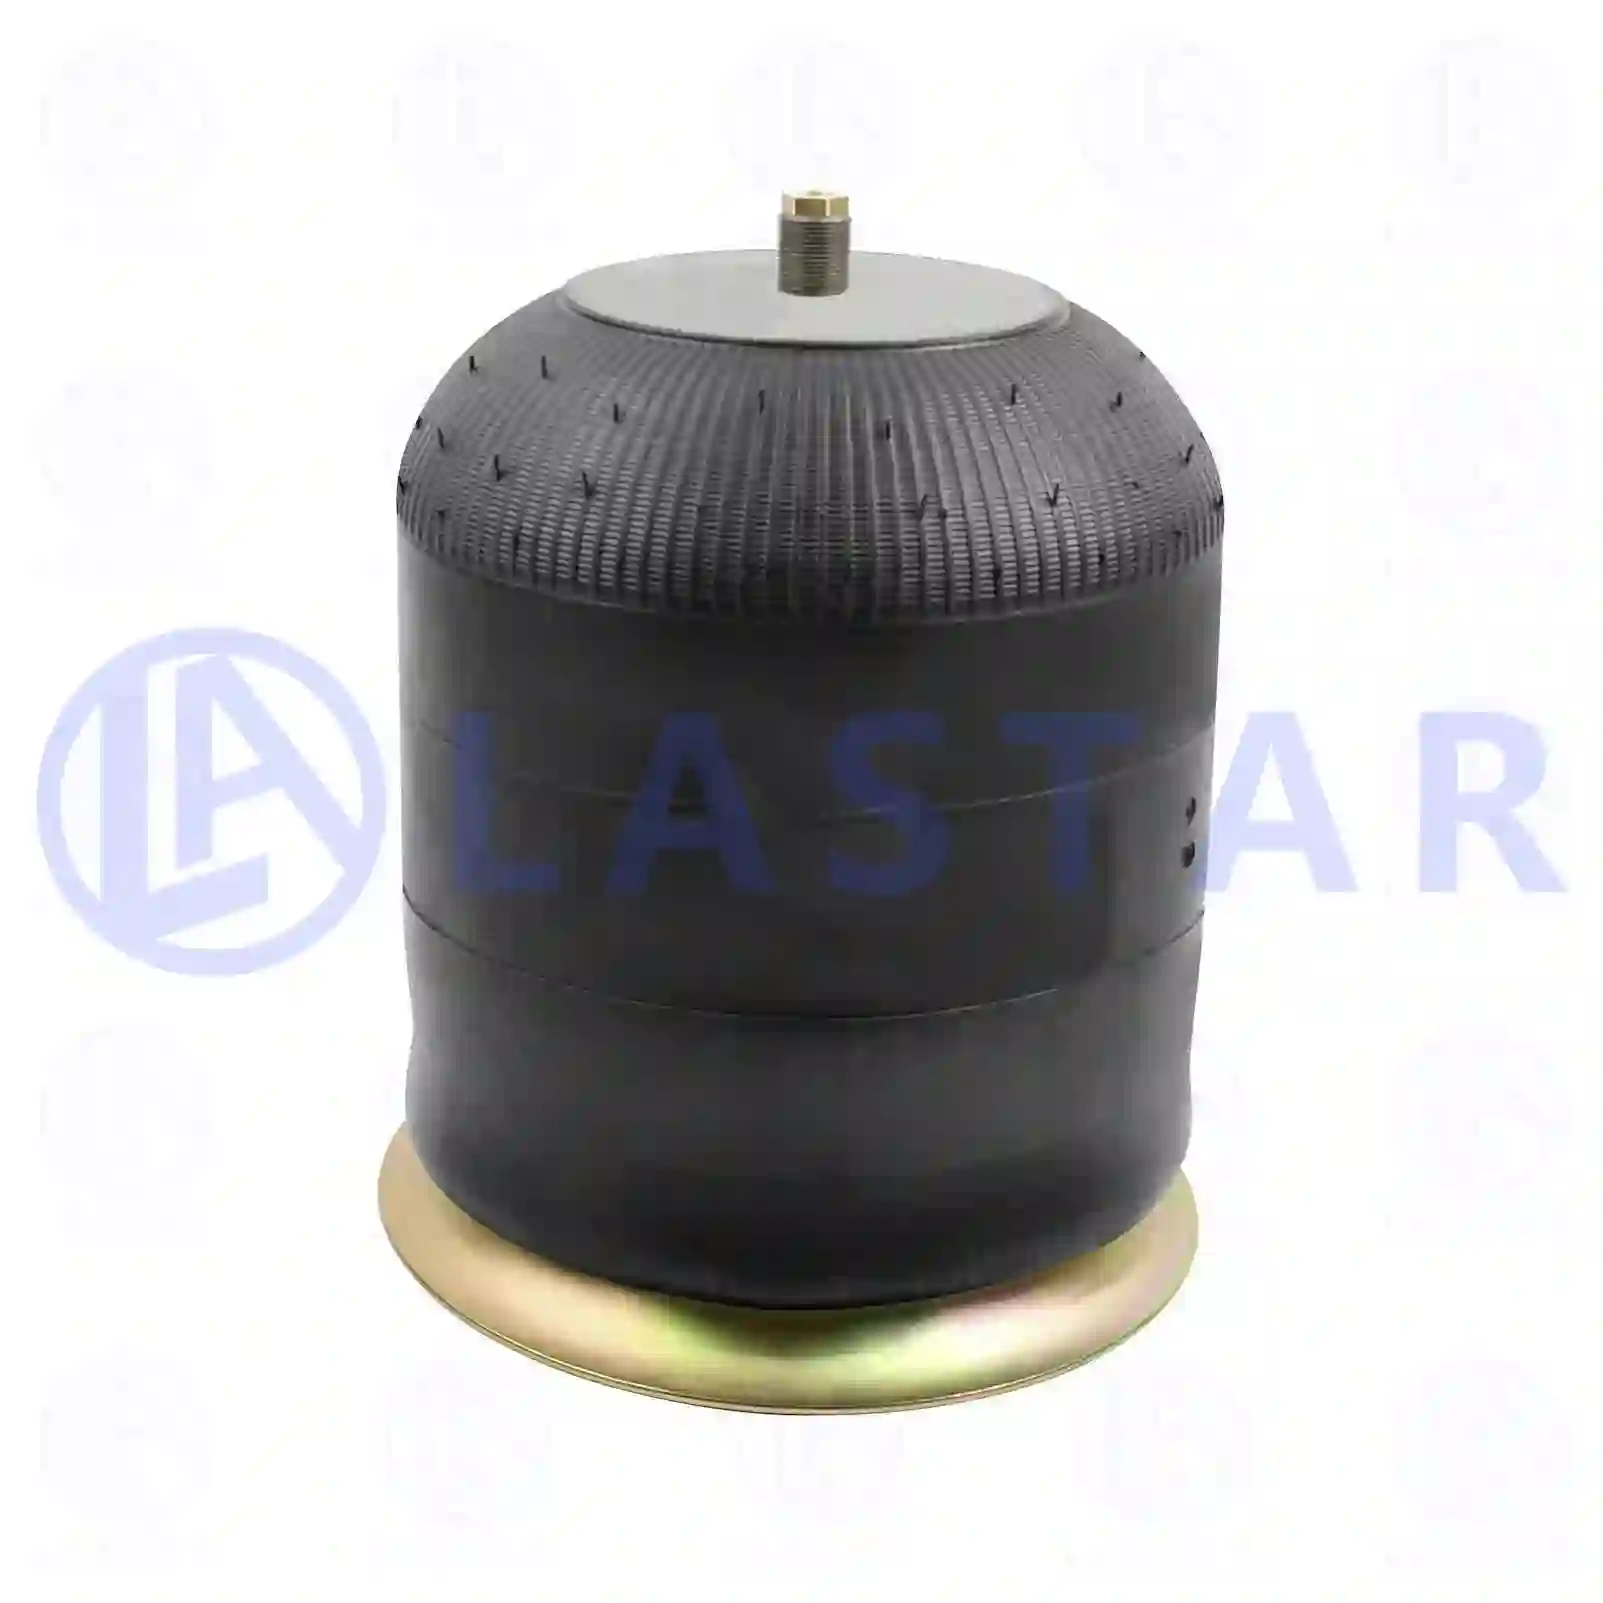 Air spring, with steel piston, 77728253, 9423200617, 9423203321, , ||  77728253 Lastar Spare Part | Truck Spare Parts, Auotomotive Spare Parts Air spring, with steel piston, 77728253, 9423200617, 9423203321, , ||  77728253 Lastar Spare Part | Truck Spare Parts, Auotomotive Spare Parts